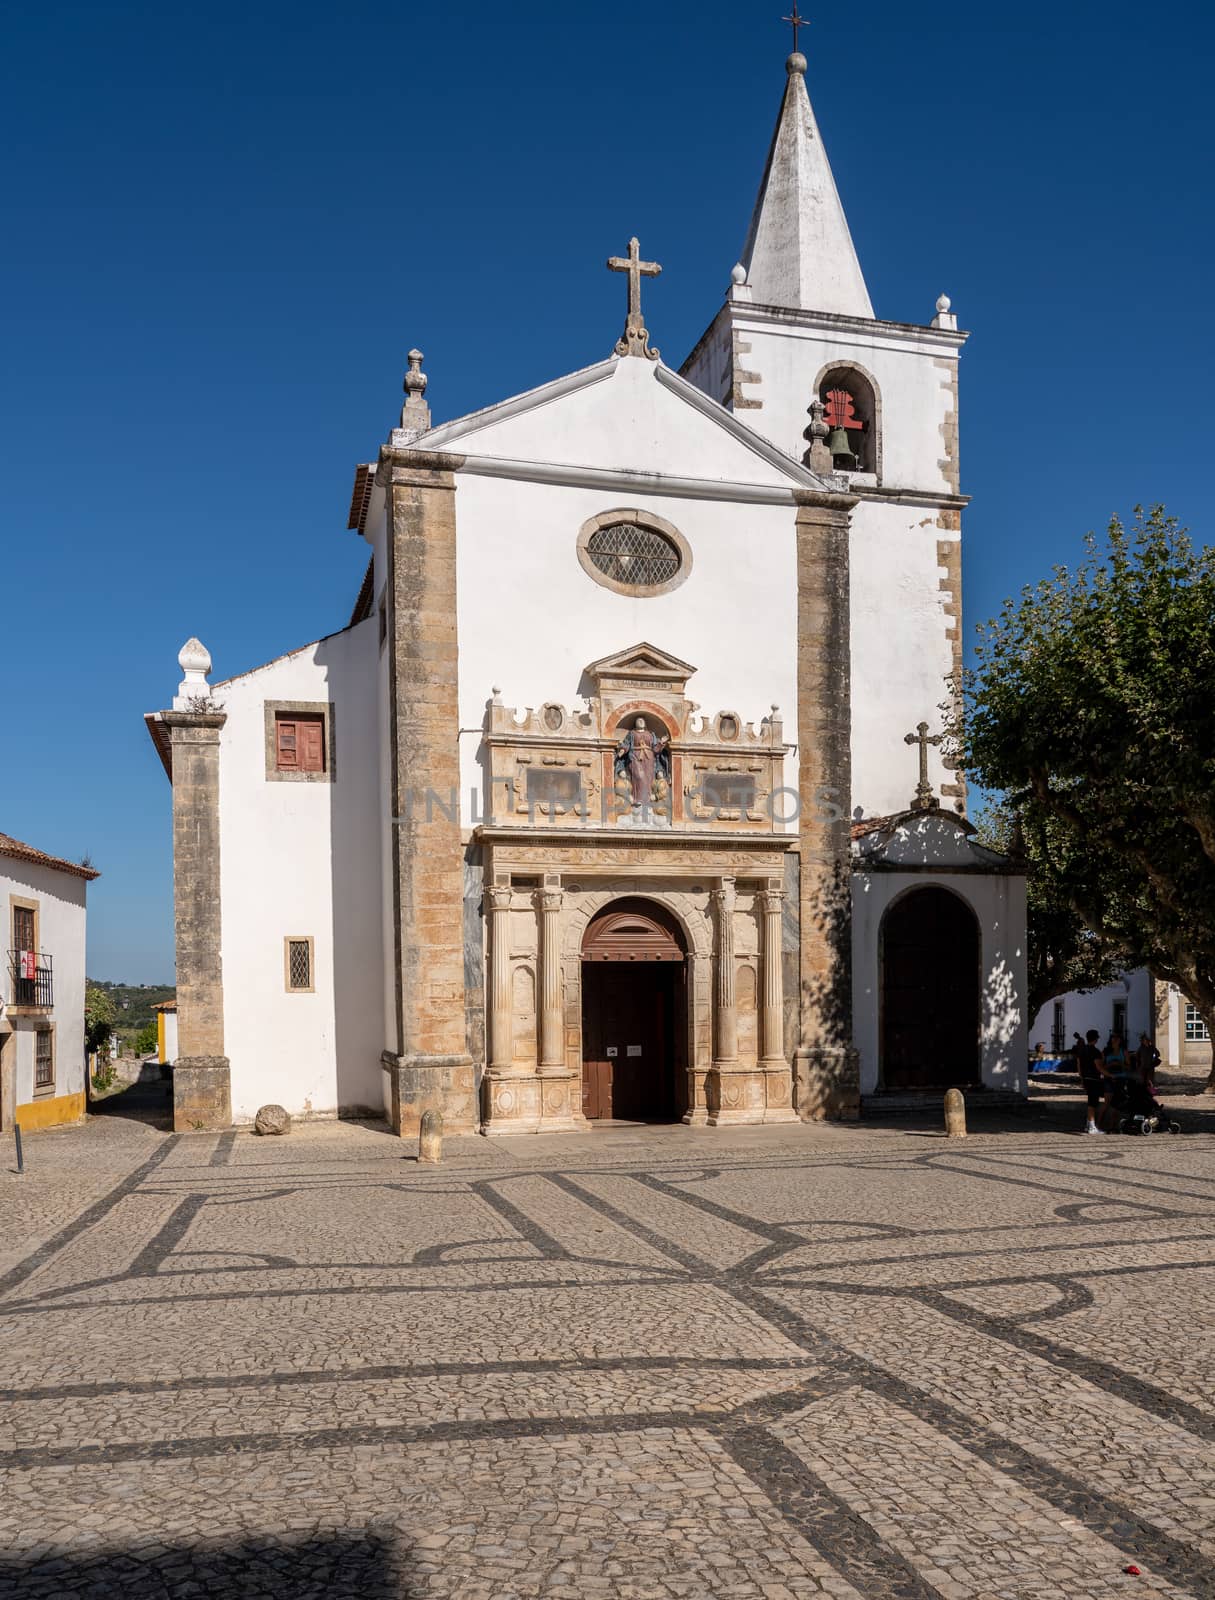 Entrance to St Mary Church in walled town of Obidos in central Portugal by steheap